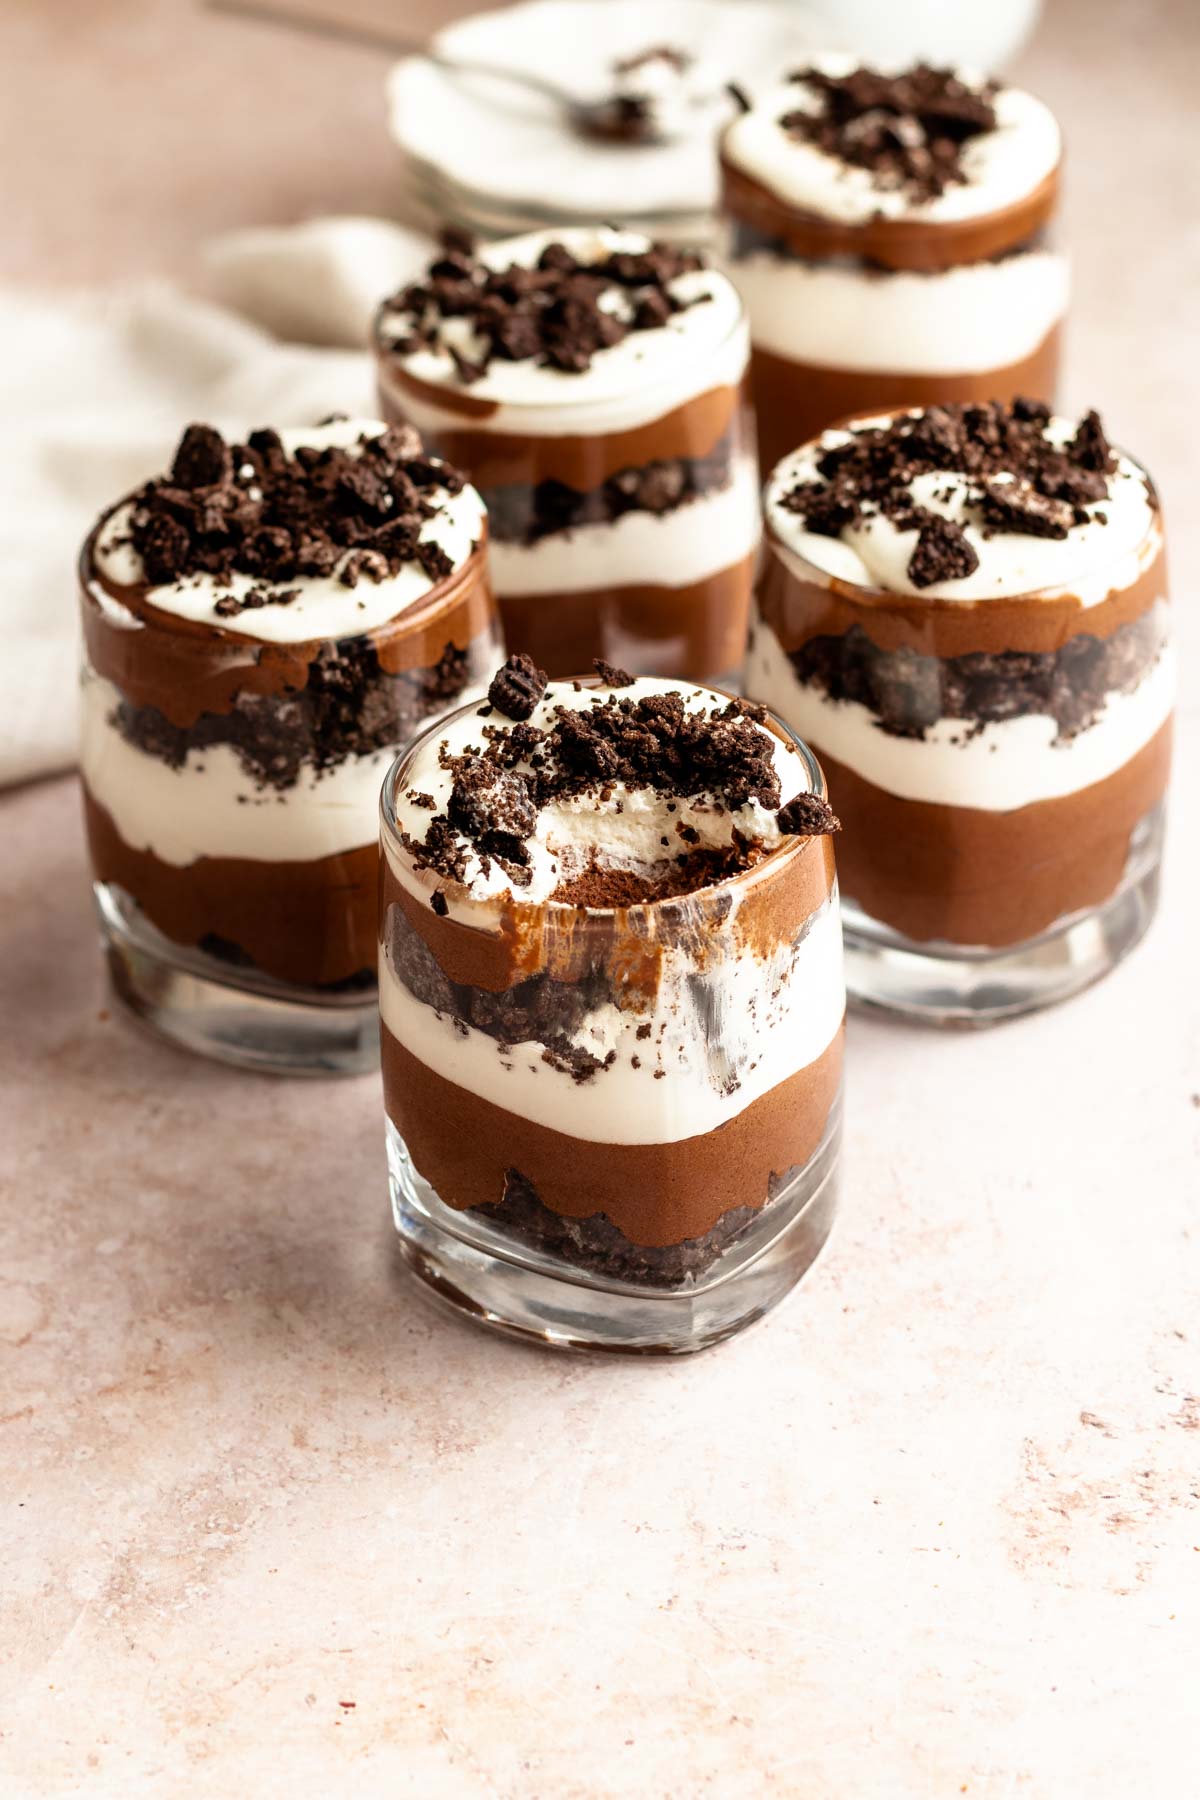 Chocolate parfait mousse cups with the middle one missing a bite.